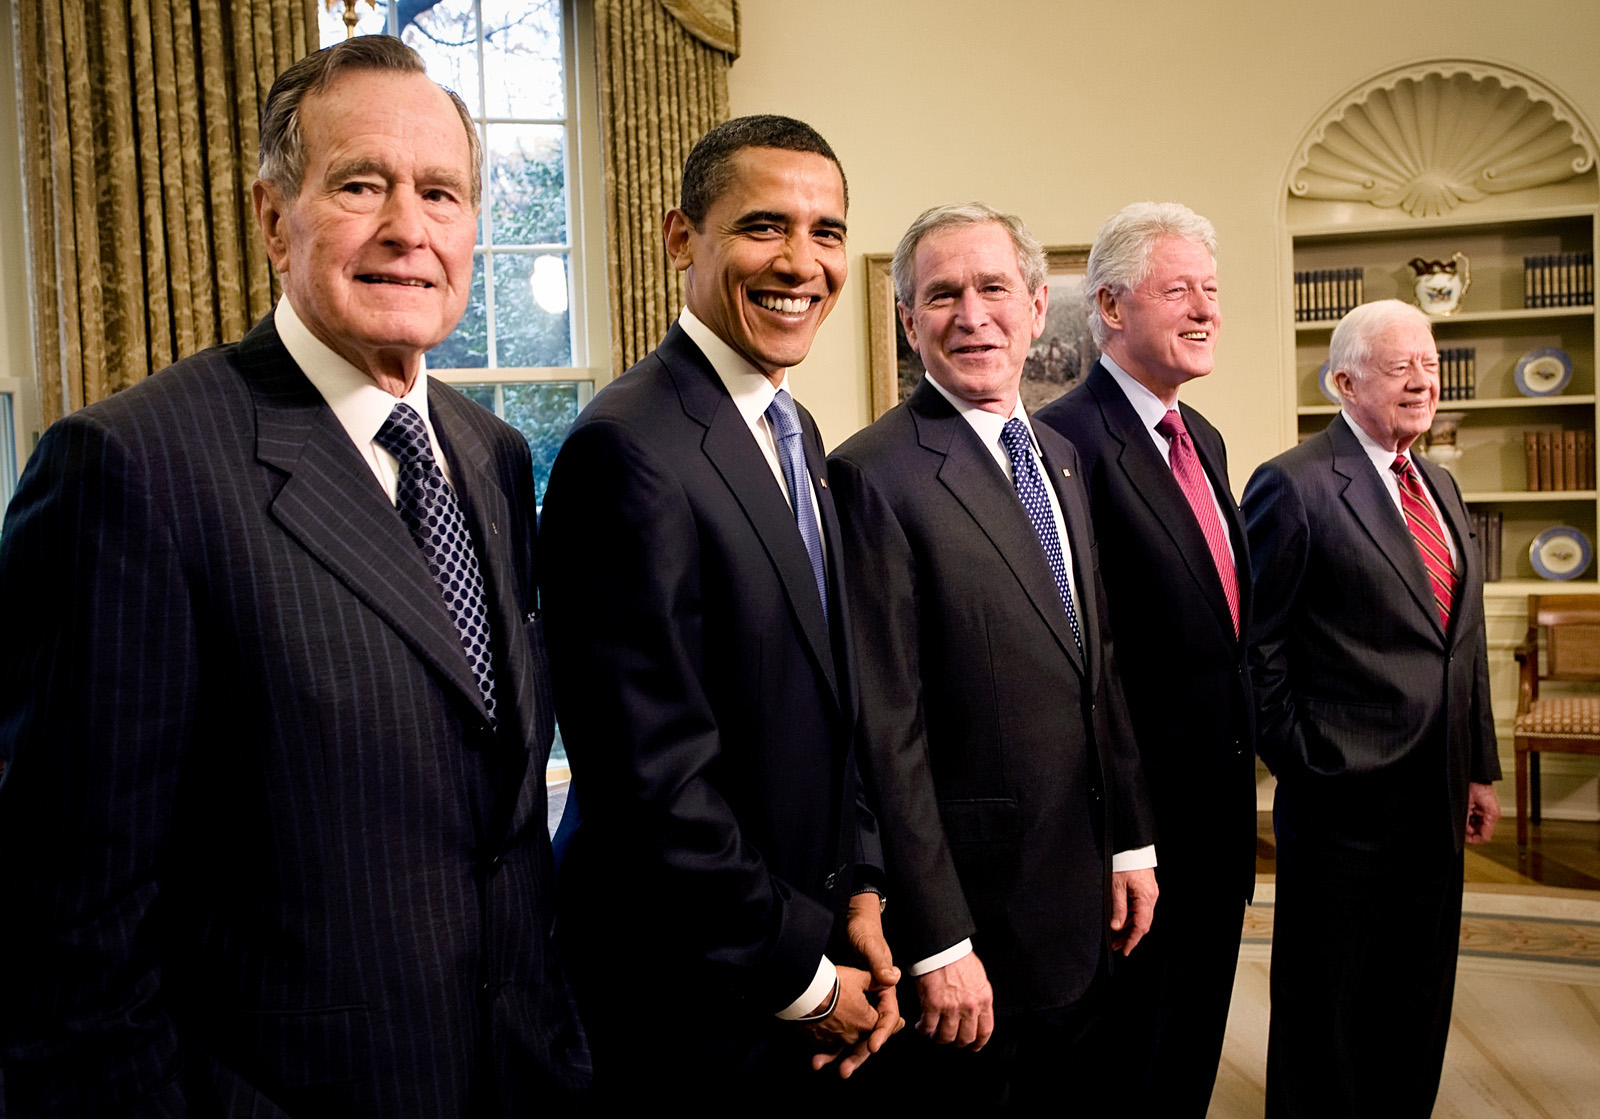 Former President George H.W. Bush, President-elect Barack Obama, President George W. Bush, former Presidents Bill Clinton and Jimmy Carter in the Oval Office at the White House, January 7, 2009. (Photo by David Hume Kennerly)